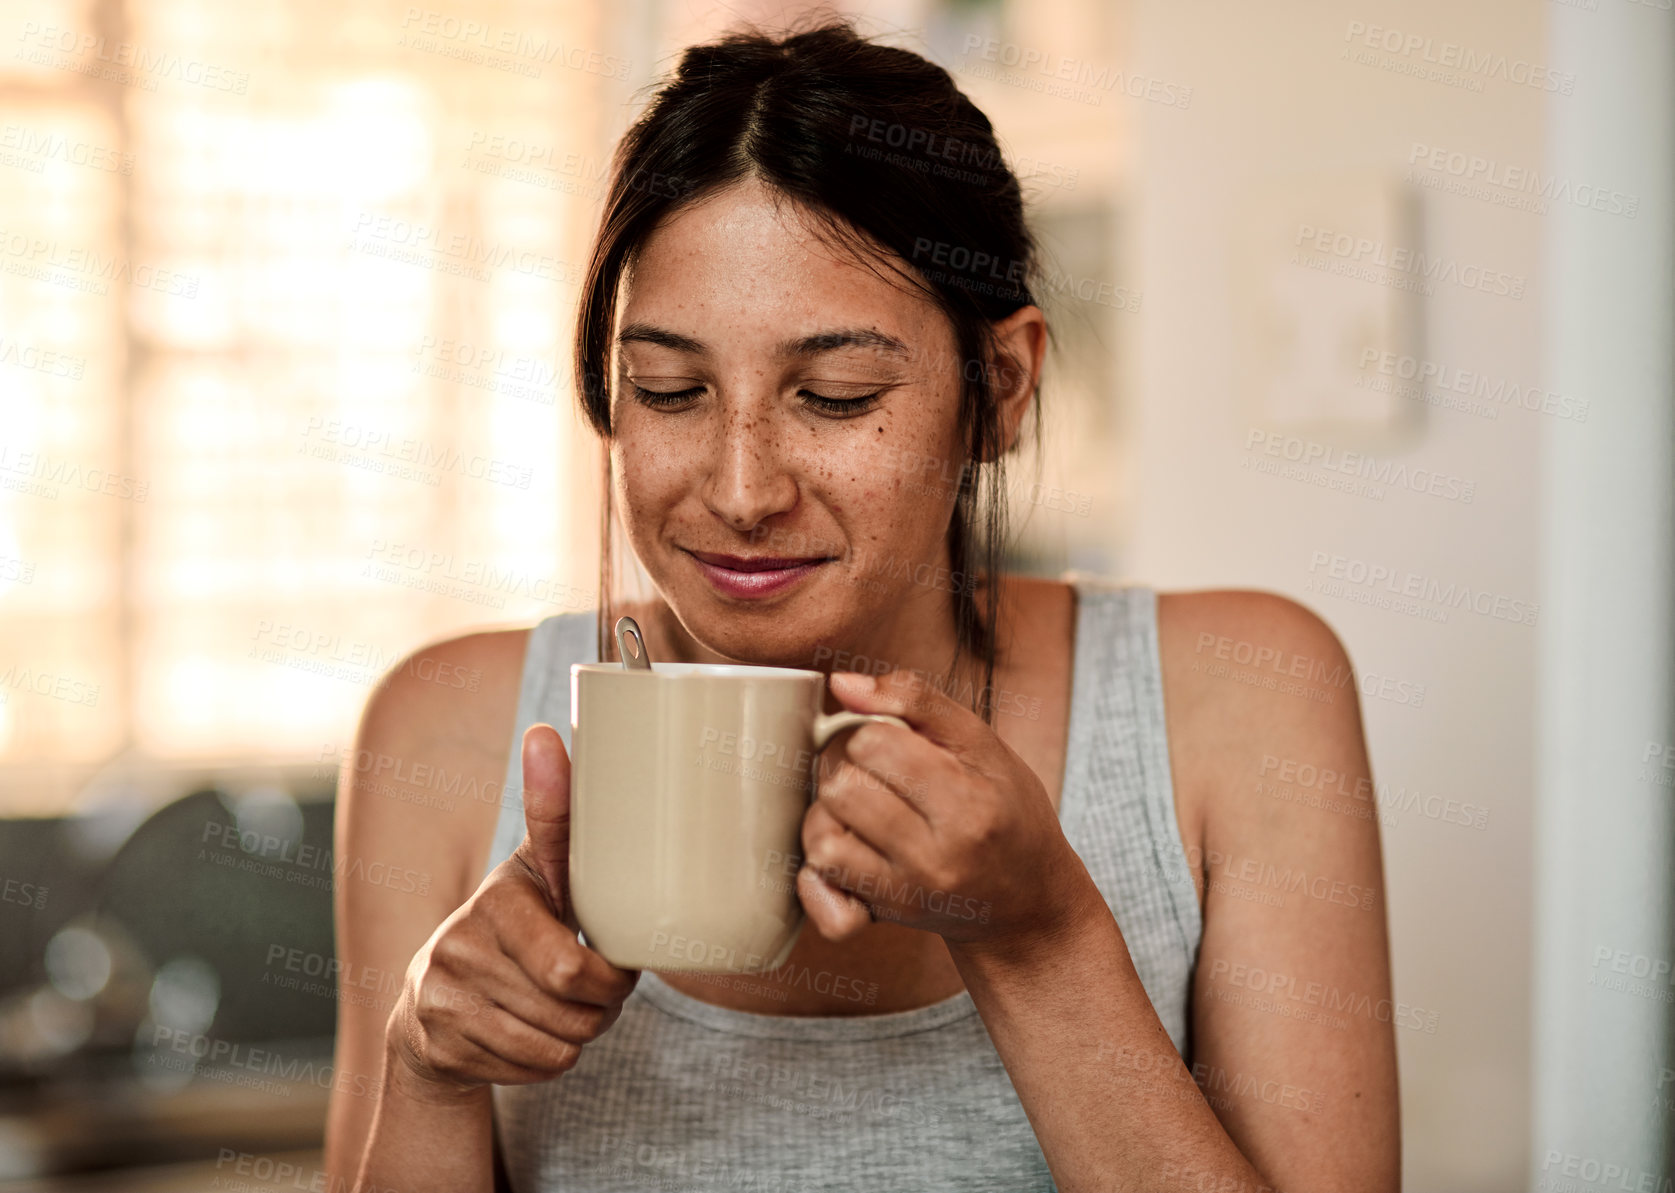 Buy stock photo Shot of a young woman enjoying a cup of coffee at home